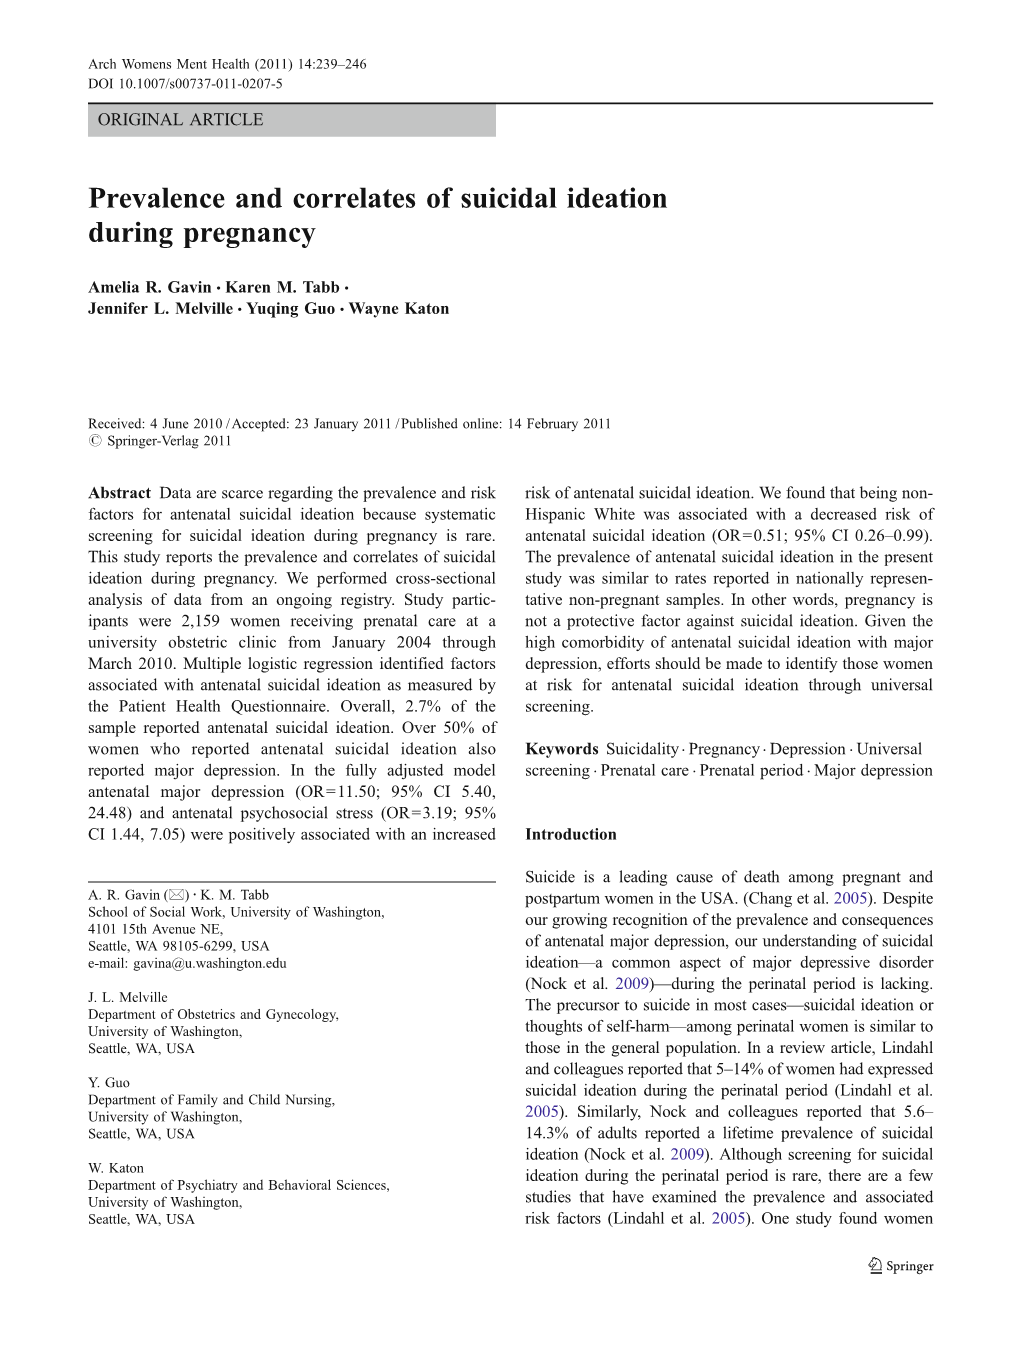 Prevalence and Correlates of Suicidal Ideation During Pregnancy